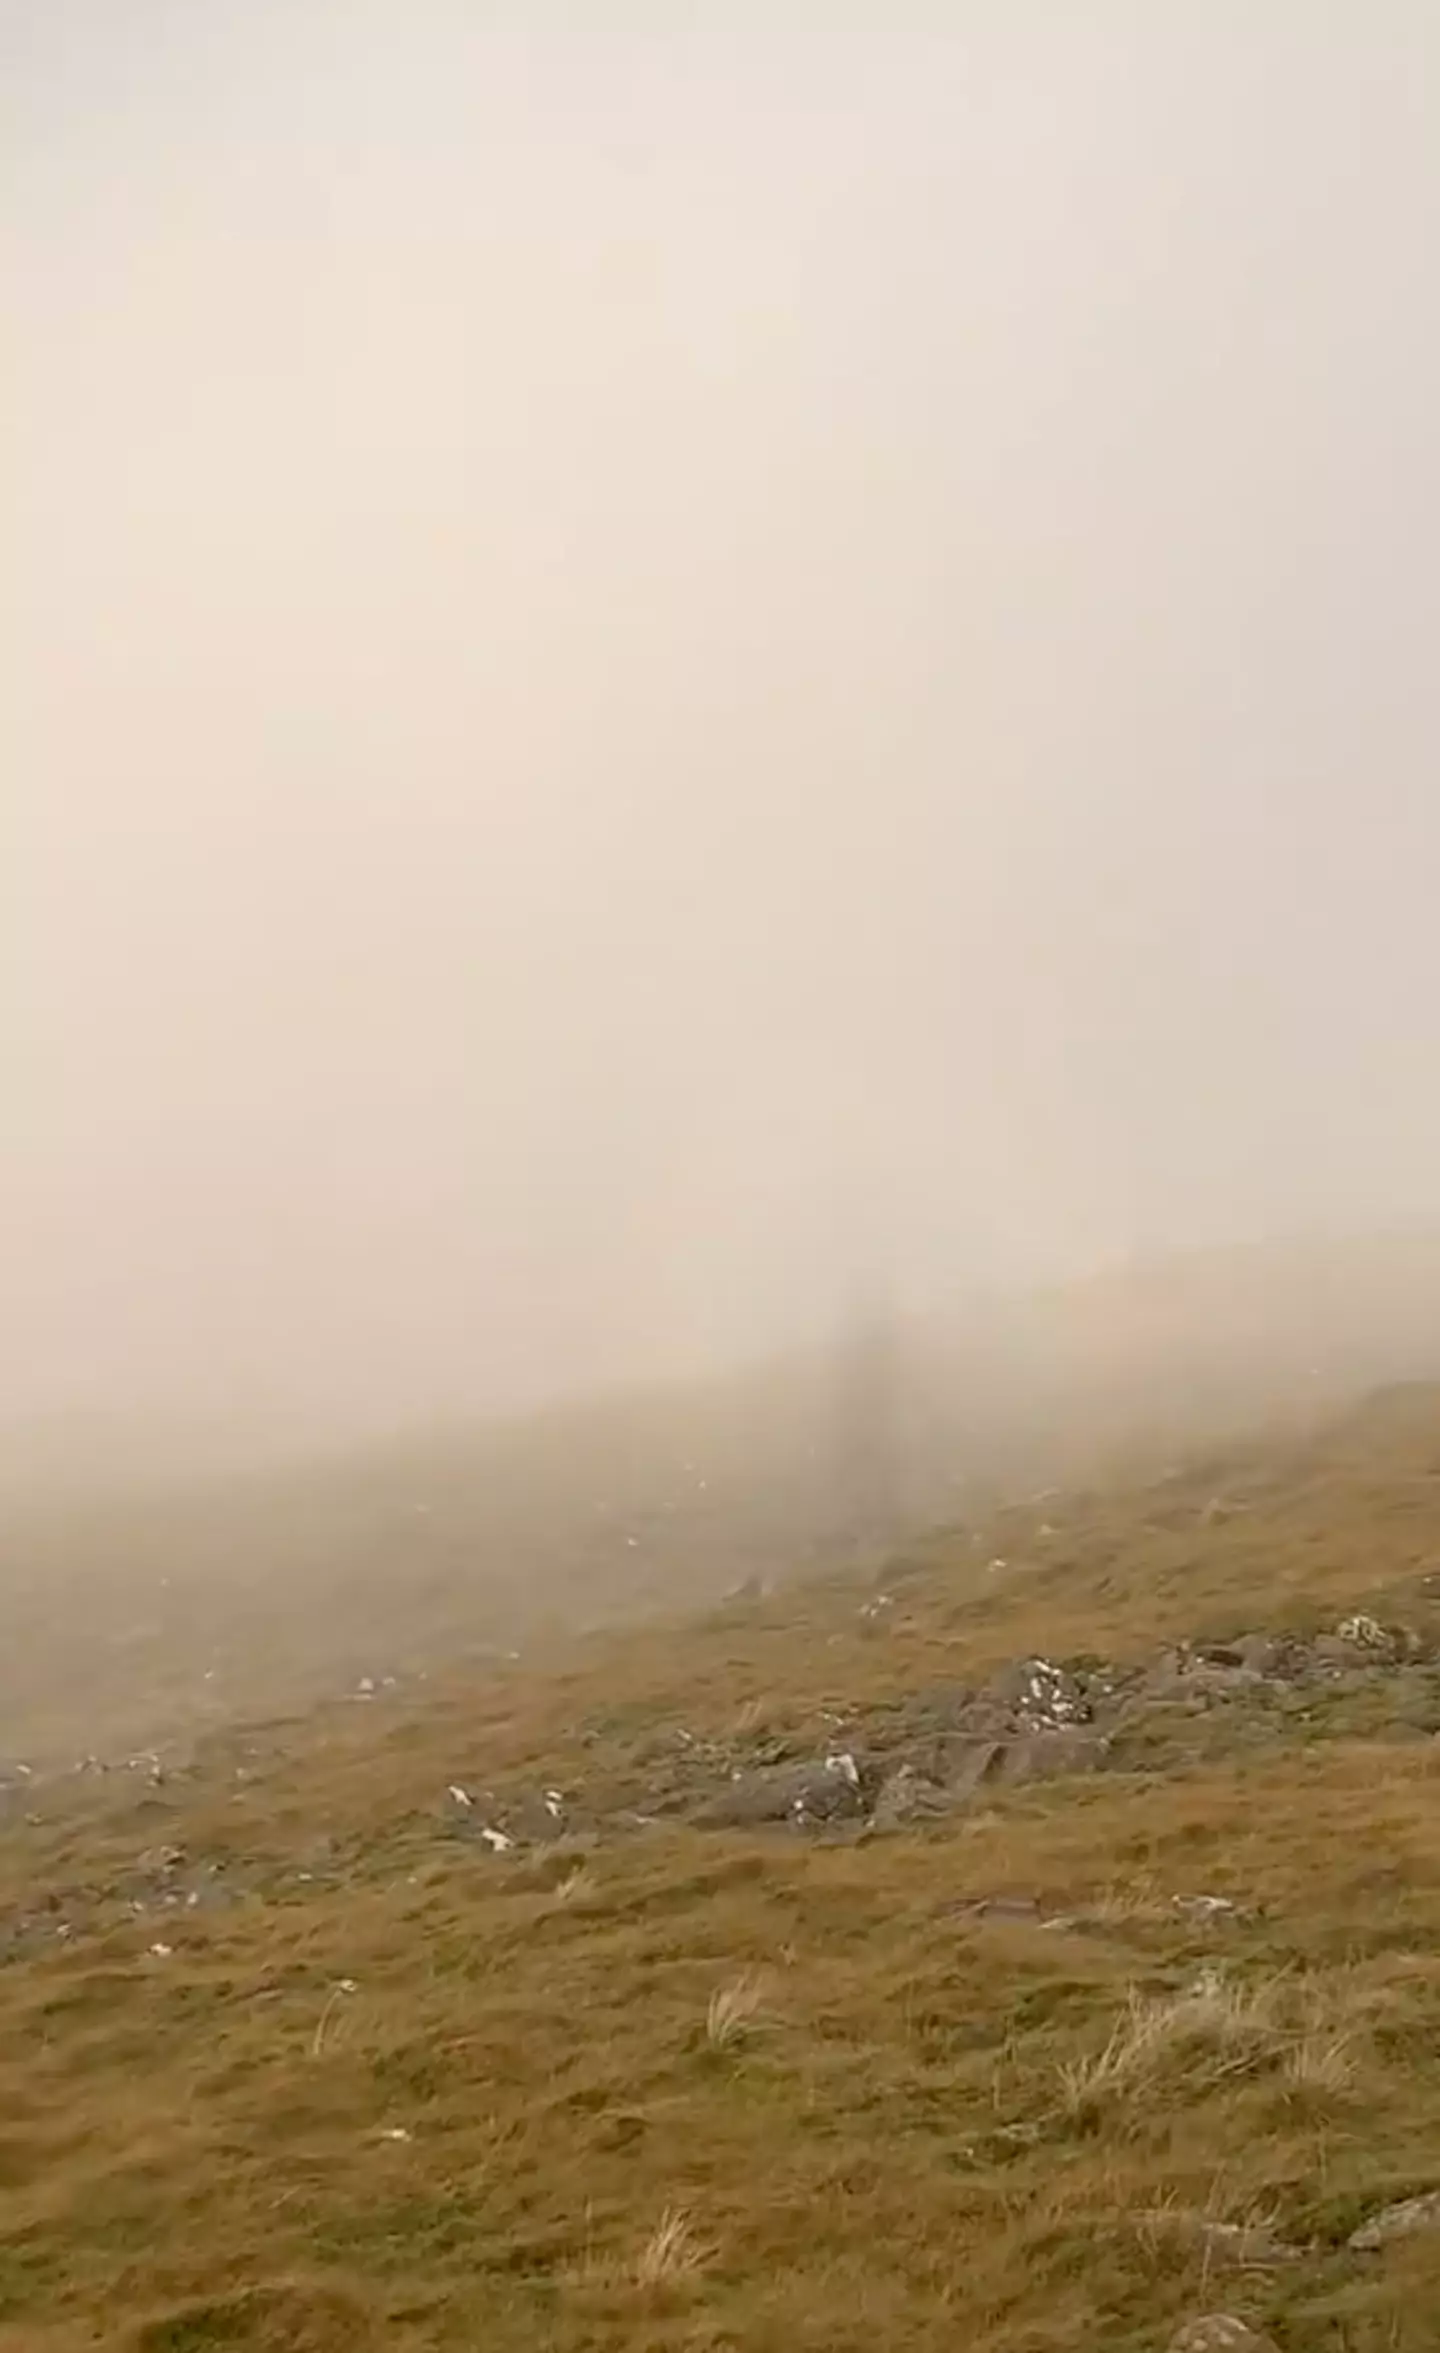 A hiker was met with a spooky site in the Lake District.